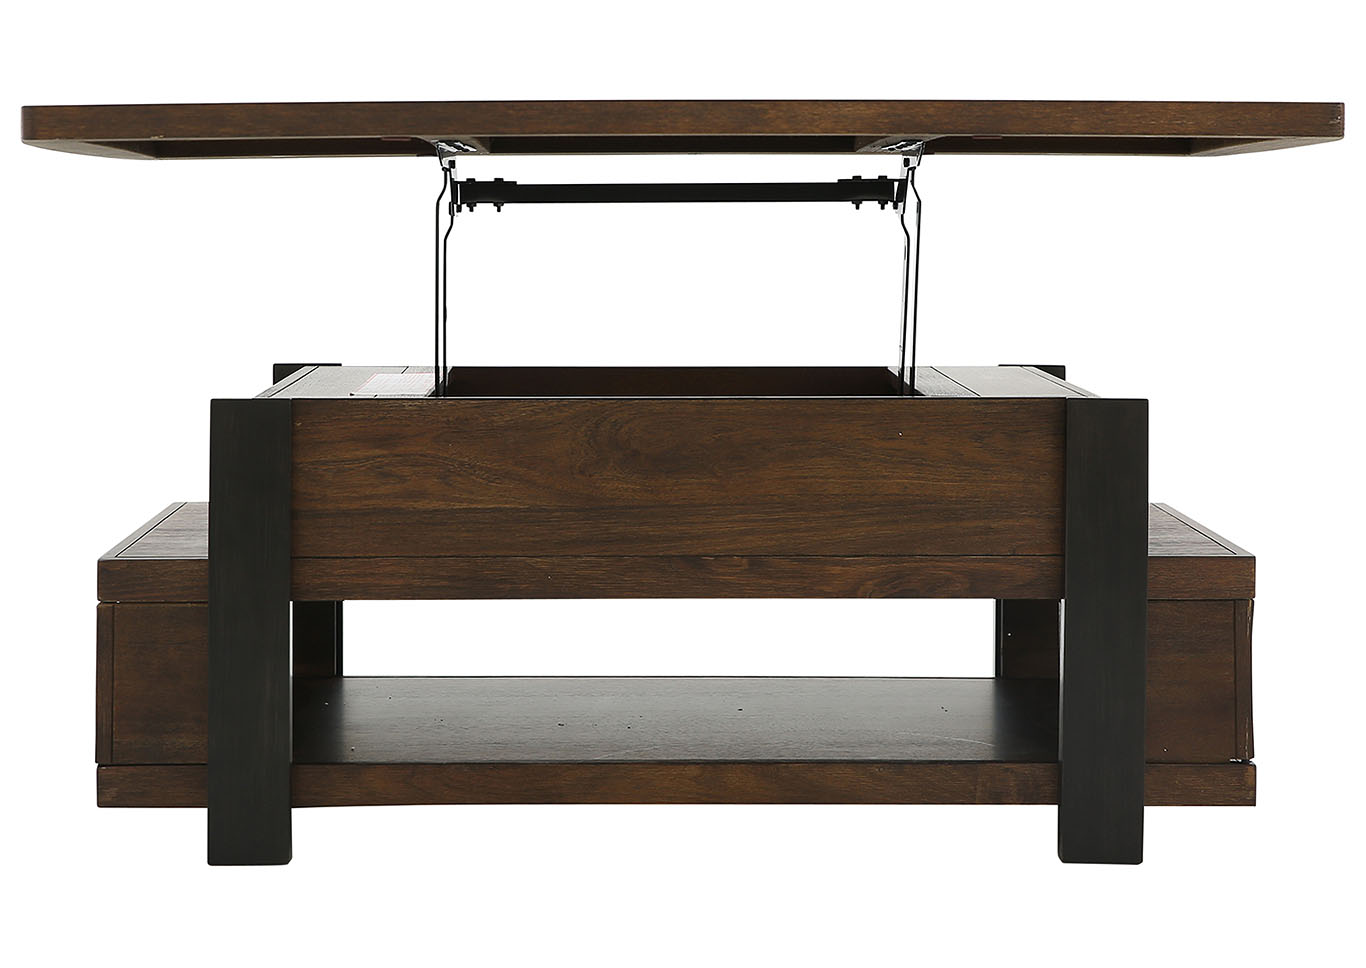 VAILBRY LIFT TOP COCKTAIL TABLE,ASHLEY FURNITURE INC.